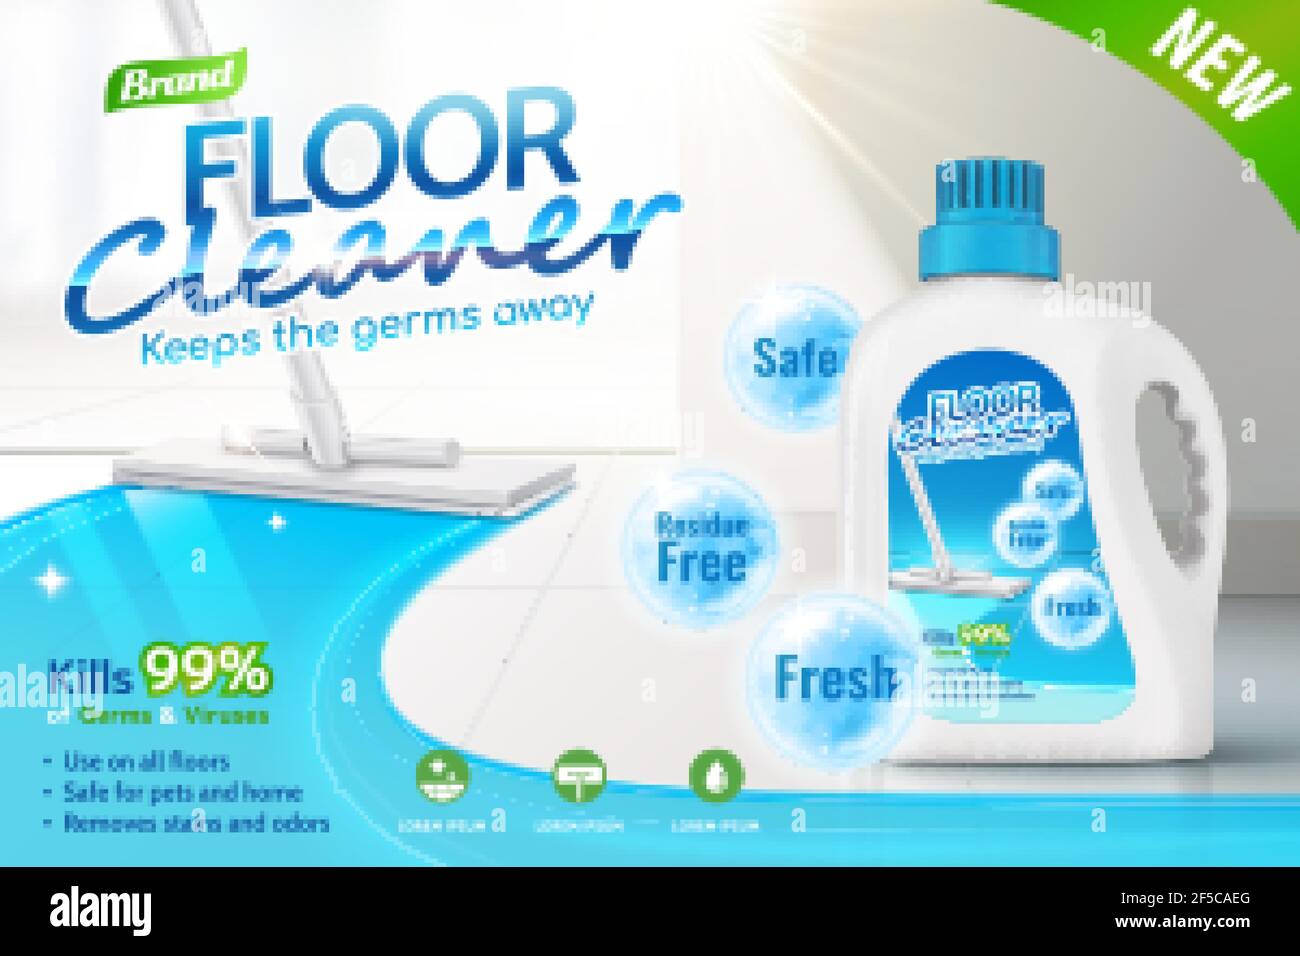 Floor cleaner ads, product package design with several efficacies in 3d illustration, mop cleaning tiled floor. Stock Vector